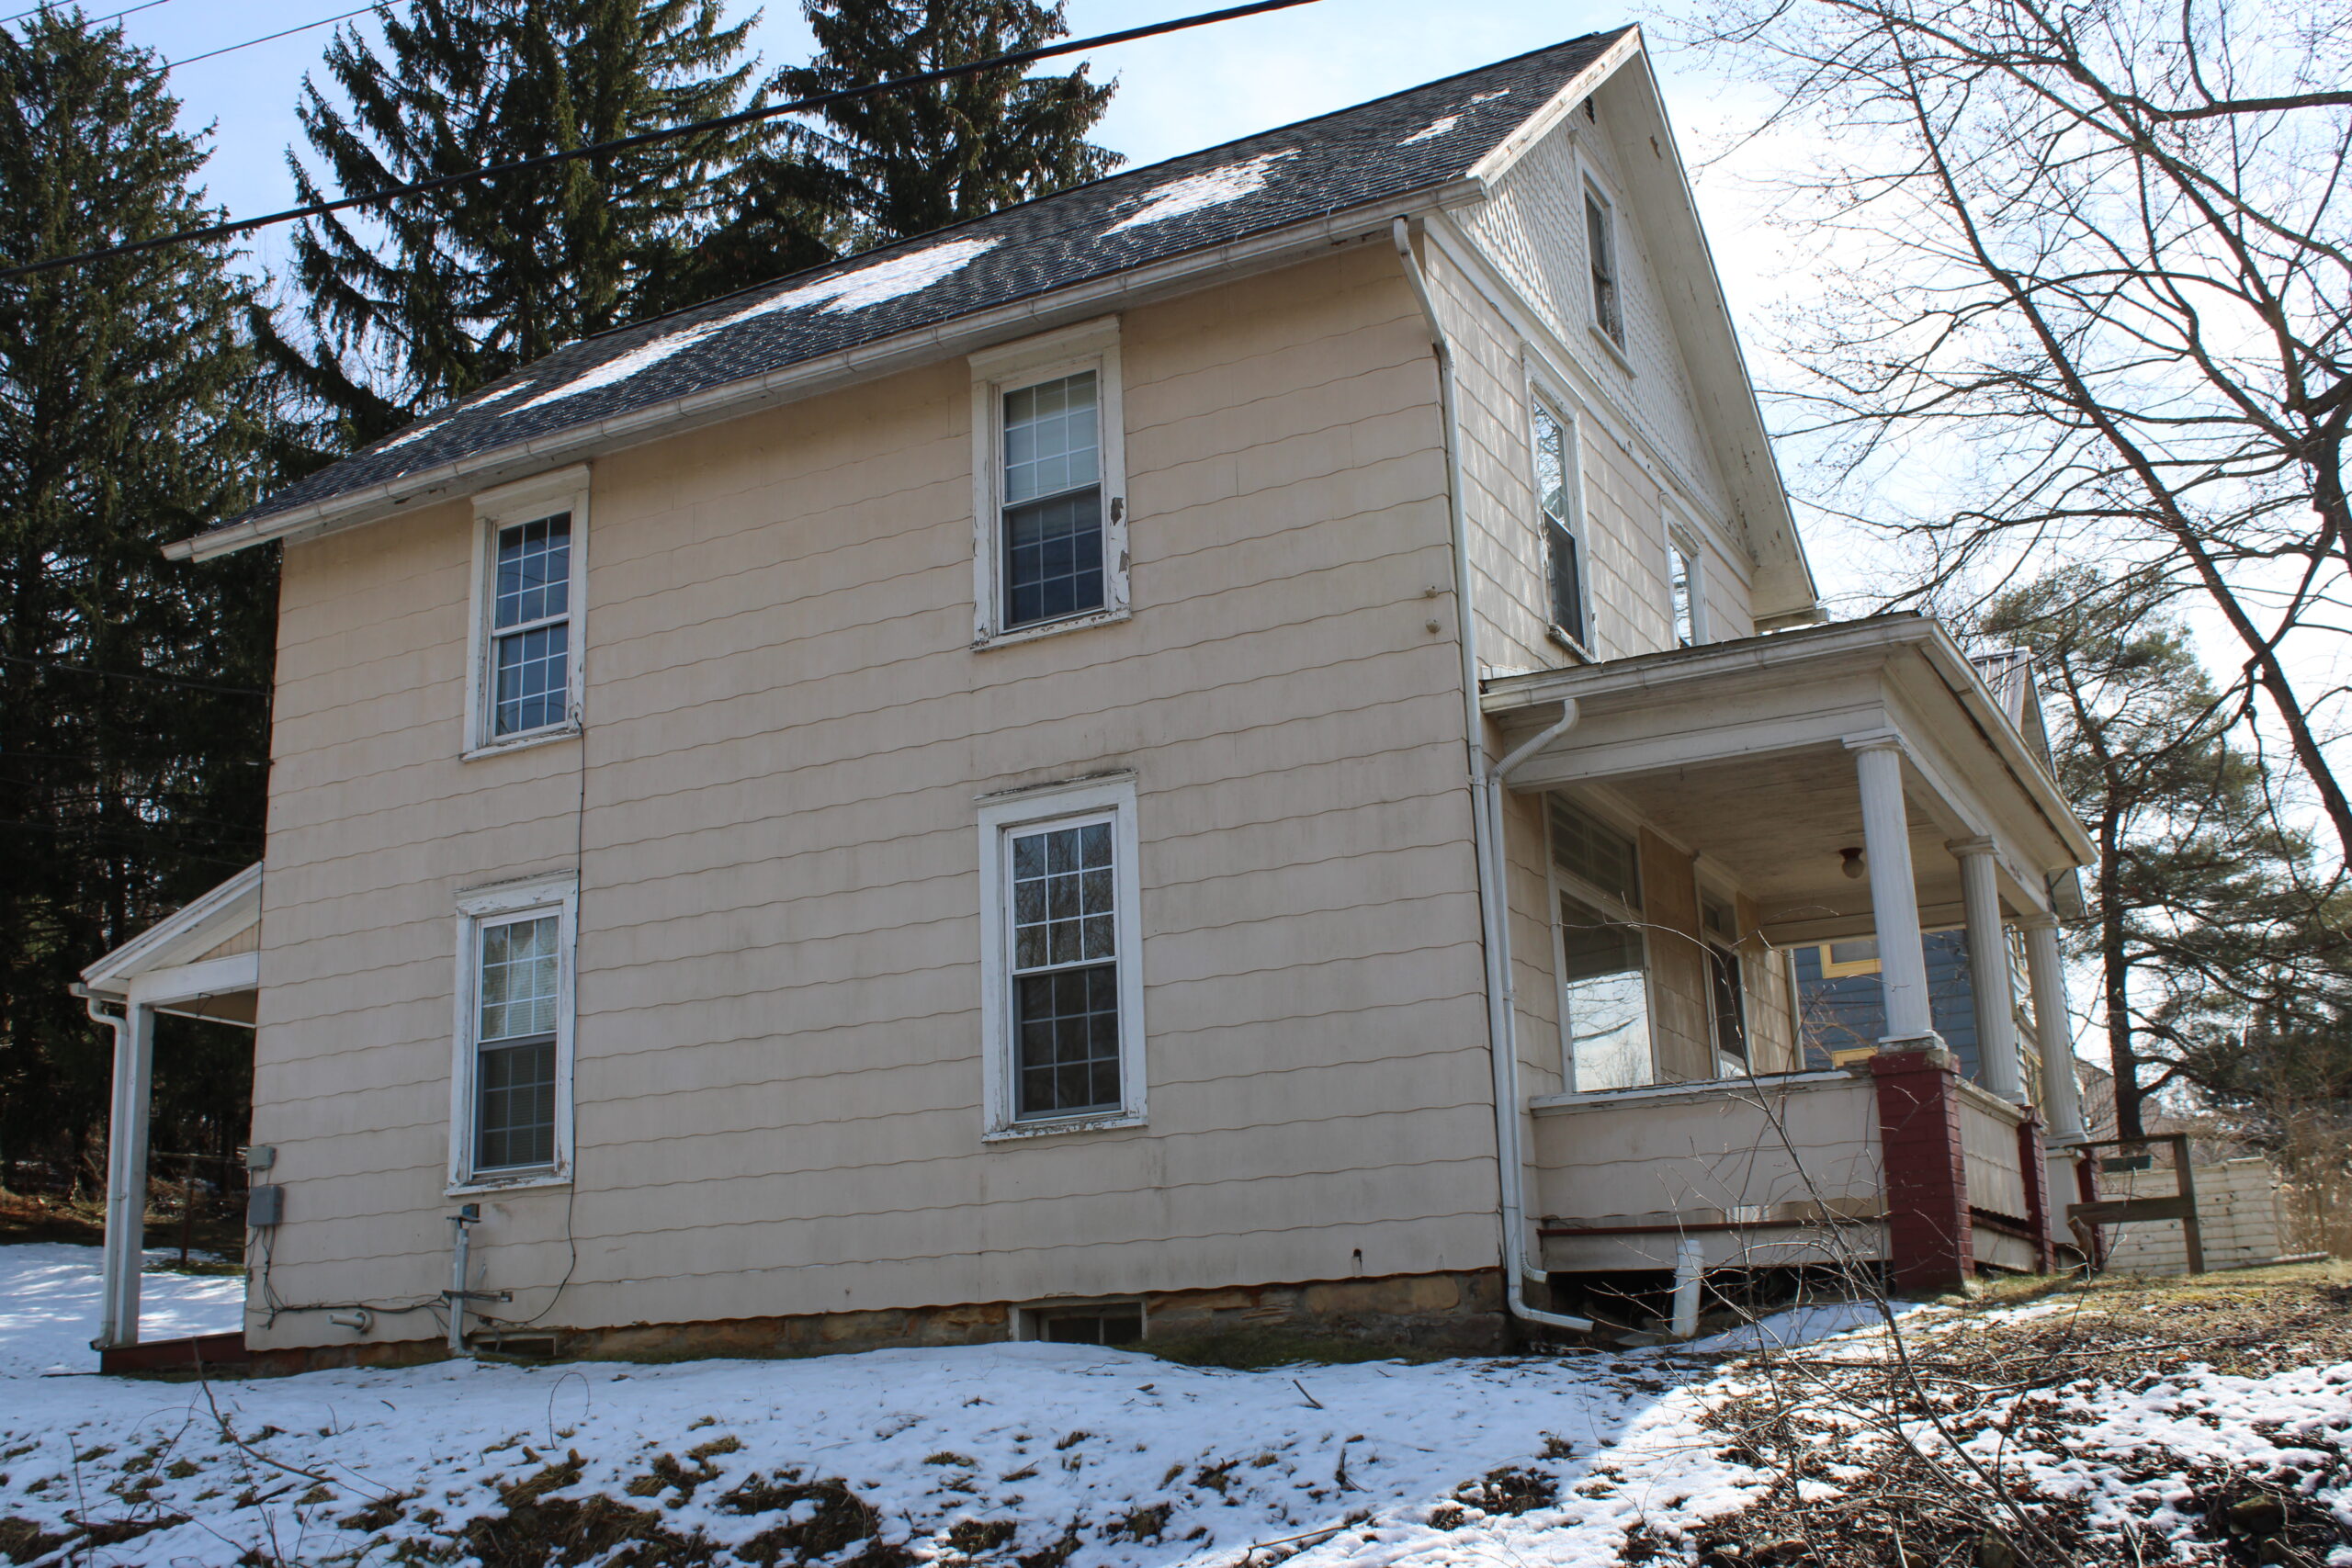 Three Bedroom House for rent on 39 S. White St., Brookville, Pa